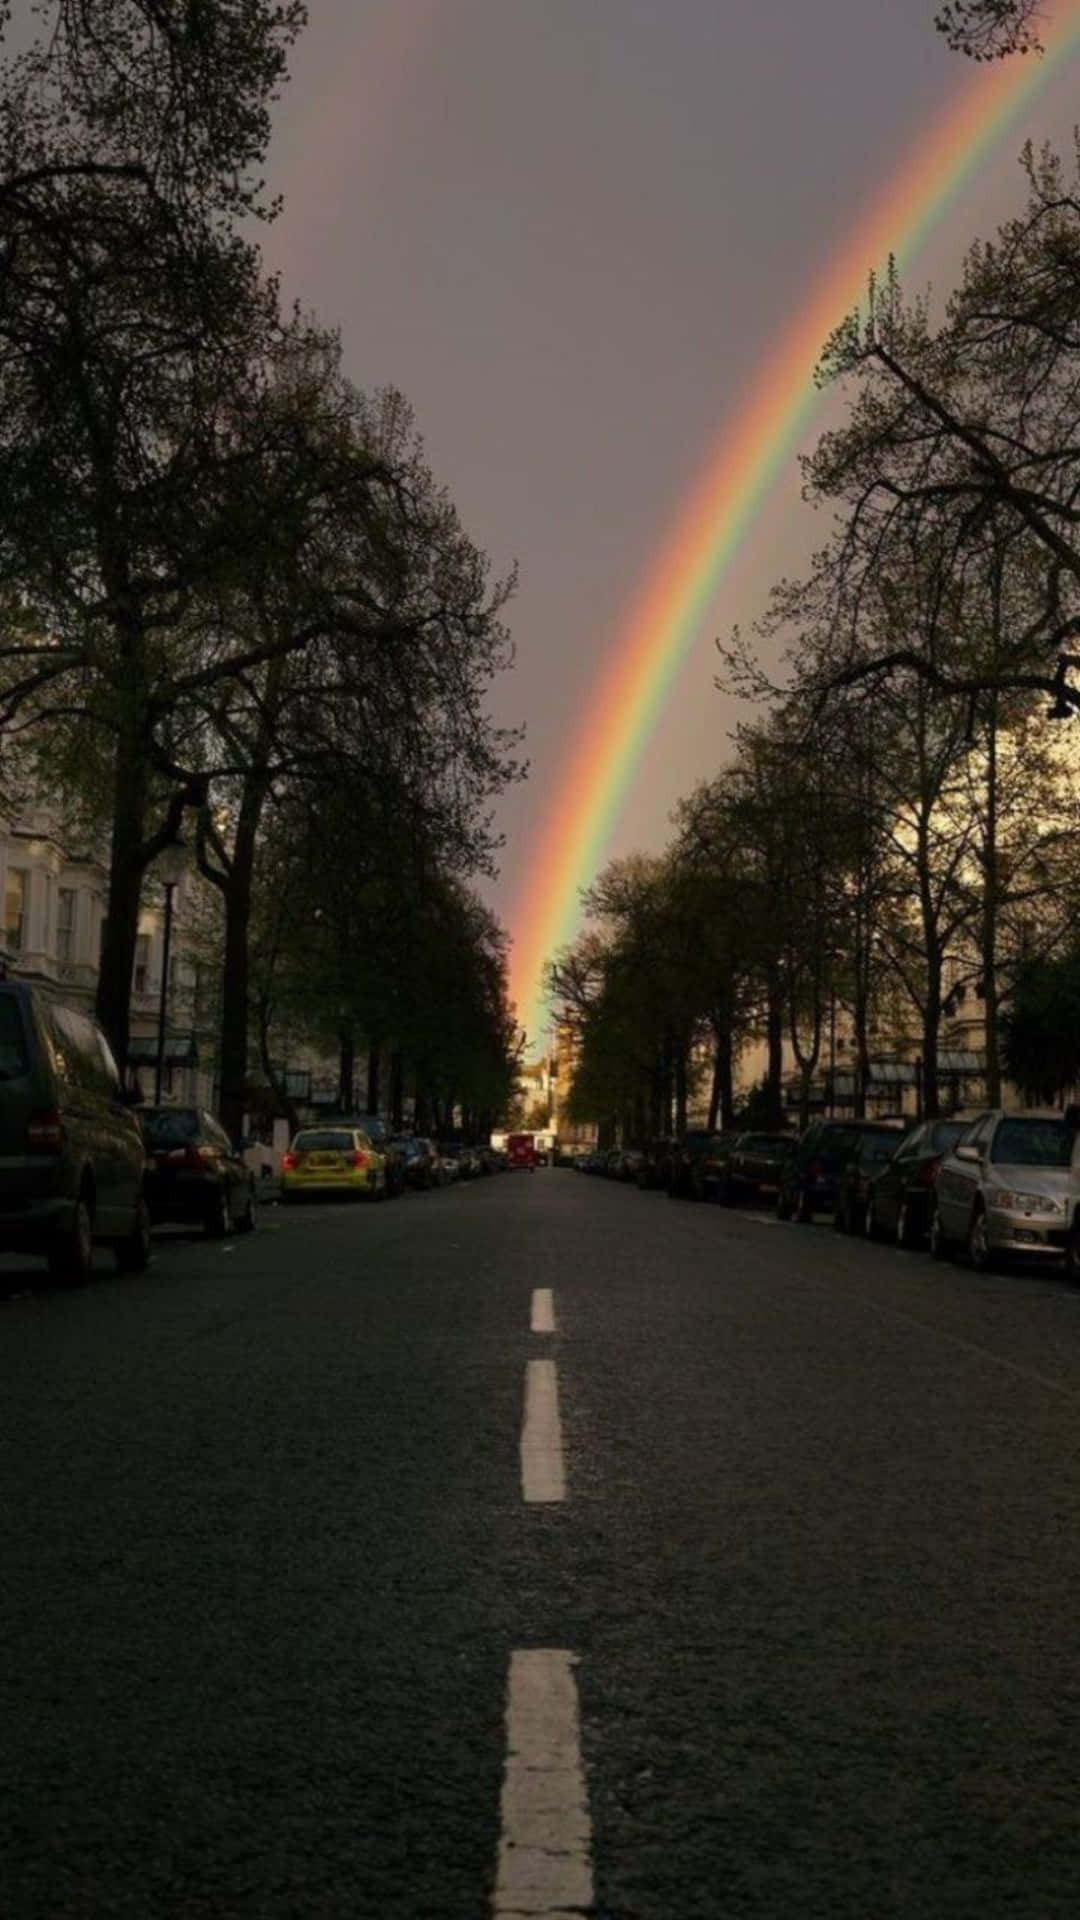 A Rainbow Is Seen Over A Street With Cars Parked In The Street Wallpaper